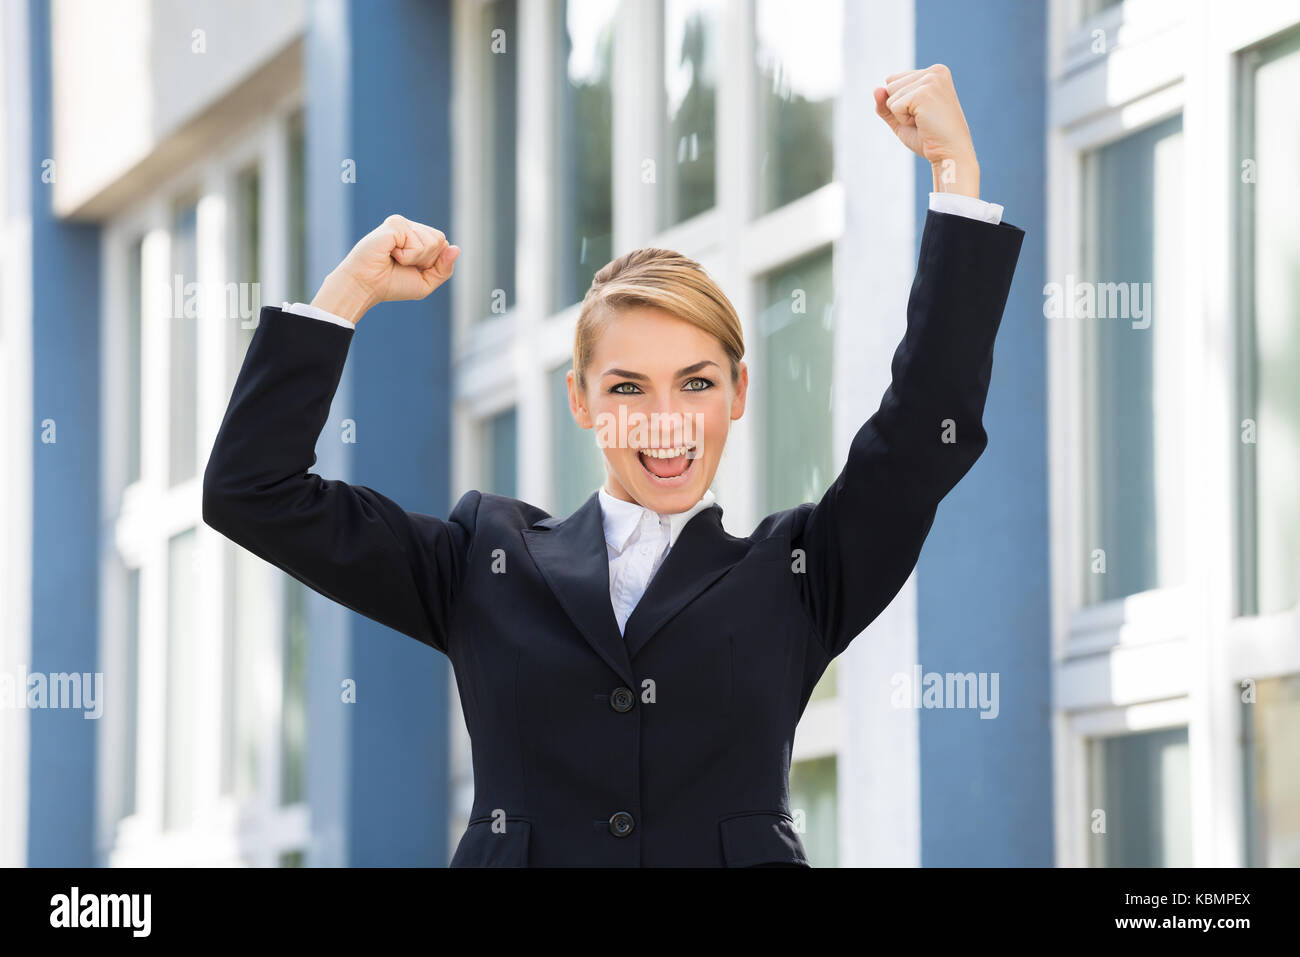 Happy businesswoman raising arms to celebrate success with building in background Stock Photo